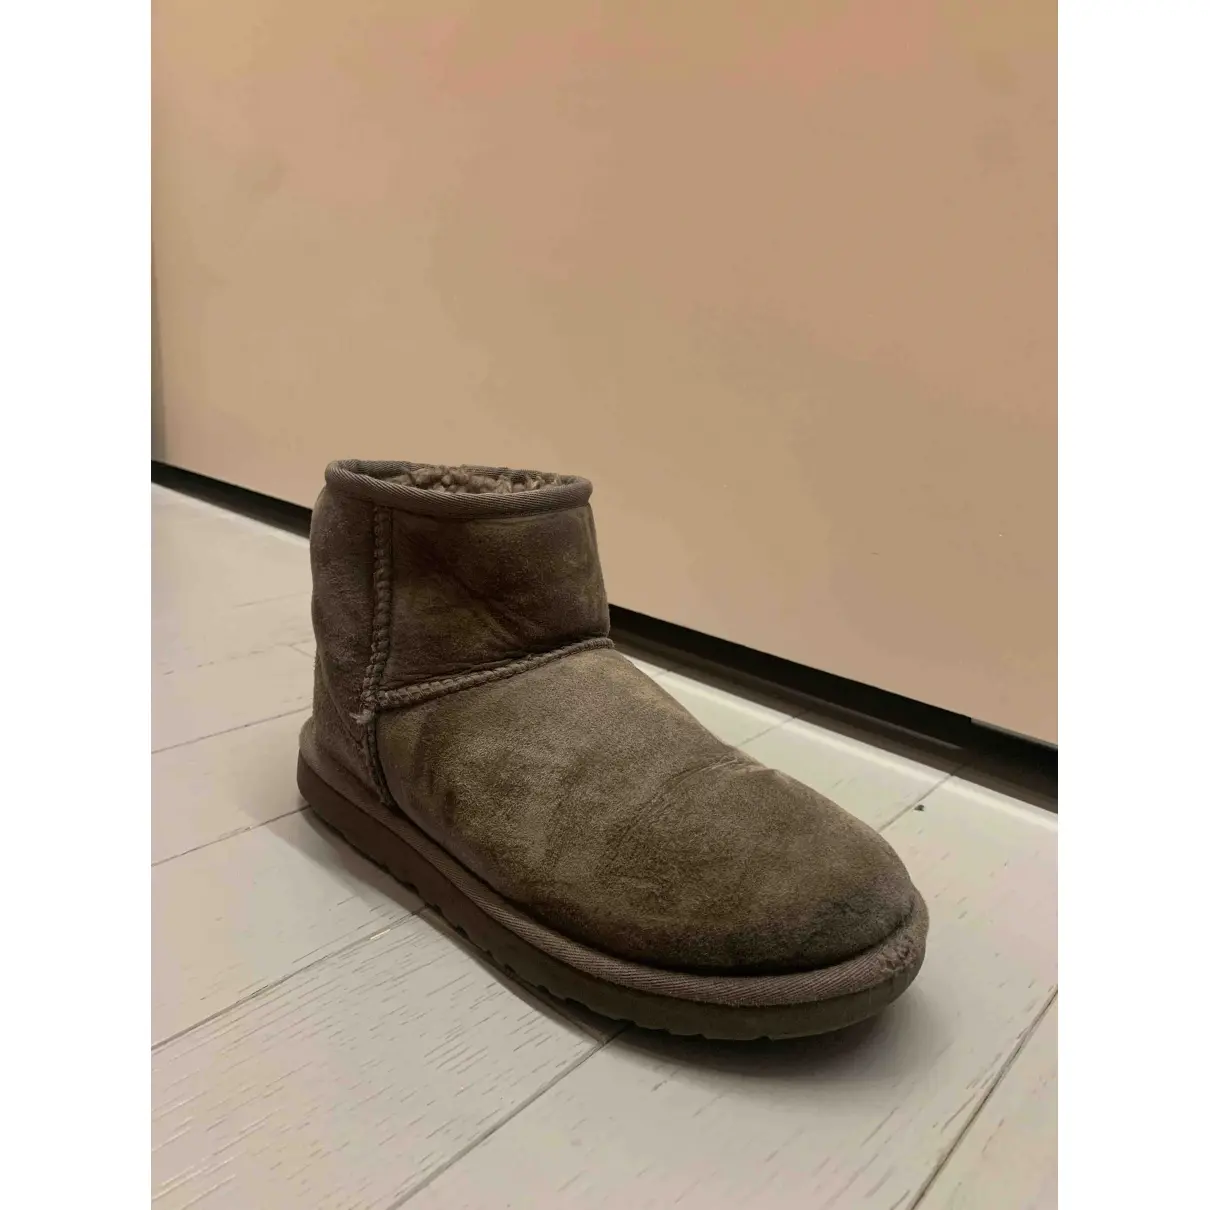 Ugg & Jimmy Choo Faux fur snow boots for sale